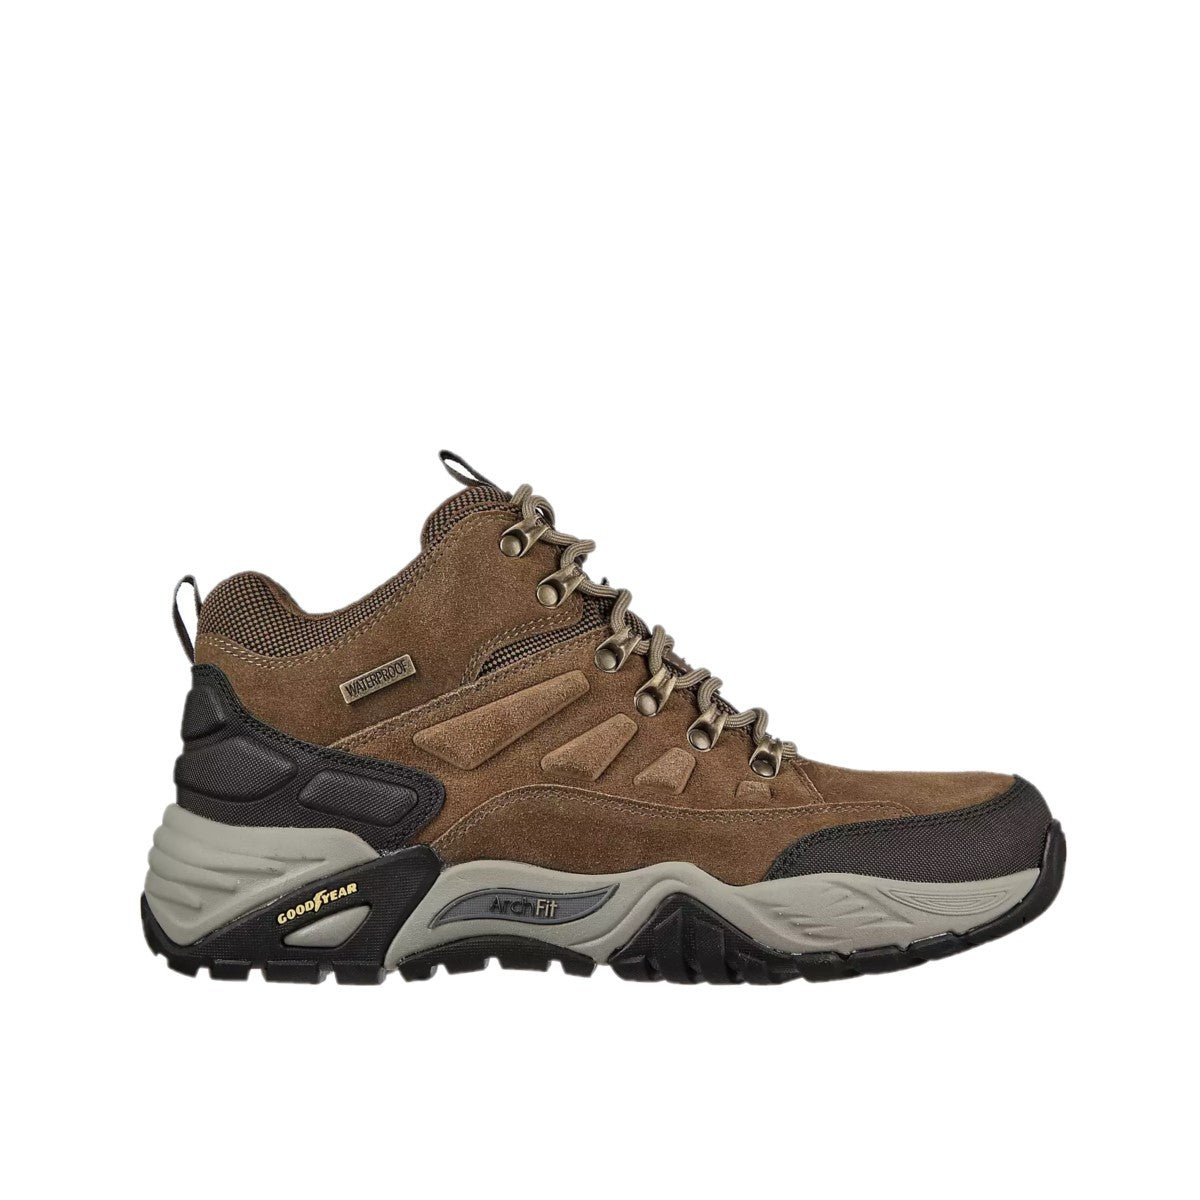 SKECHERS 204408WW/KHK ARCH FIT RECON - ROMAR MN'S (Extra Wide) Khaki Leather & Mesh Hiking Boots - Groove Rabbit